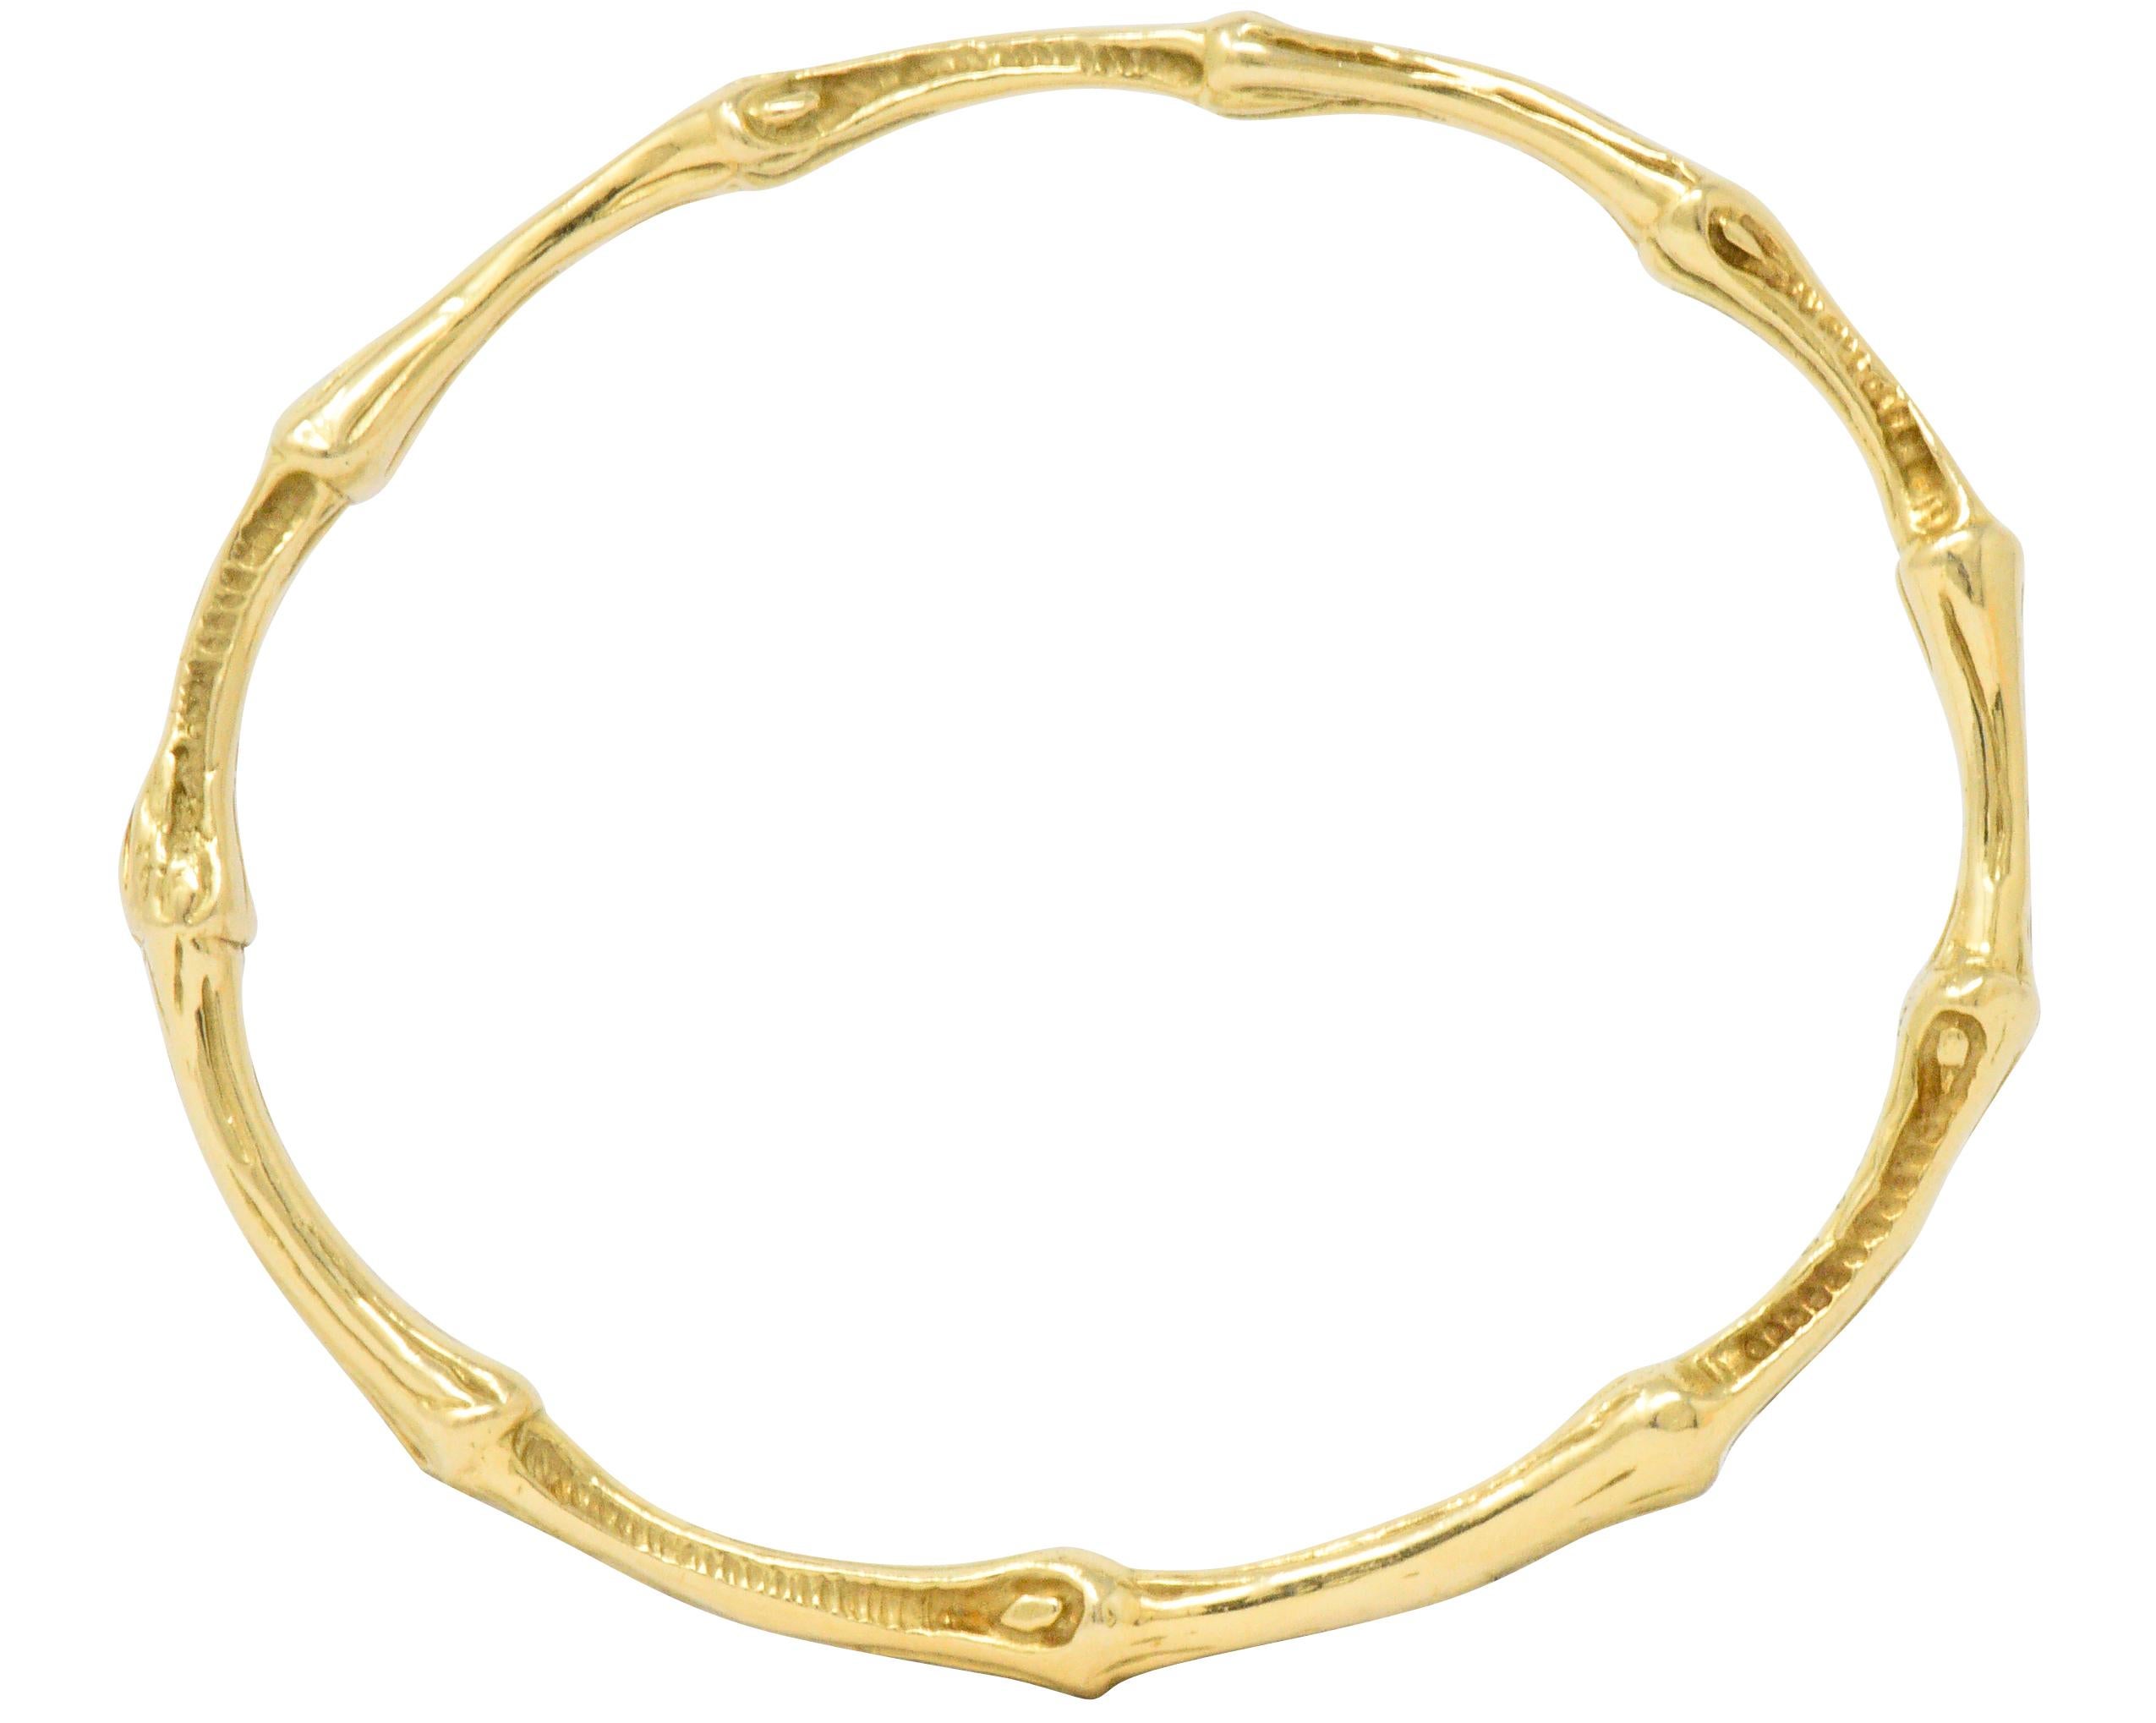 Slip-on style bangle

Bamboo motif with textured and polished gold

Fully signed Tiffany & Co., stamped 1996 and 750 for 18 karat gold

Inner Circumference: 7 1/4 Inches

Width: 1/4 Inch (widest)

Total Weight: 33.1 Grams

Exotic. Fashionable.